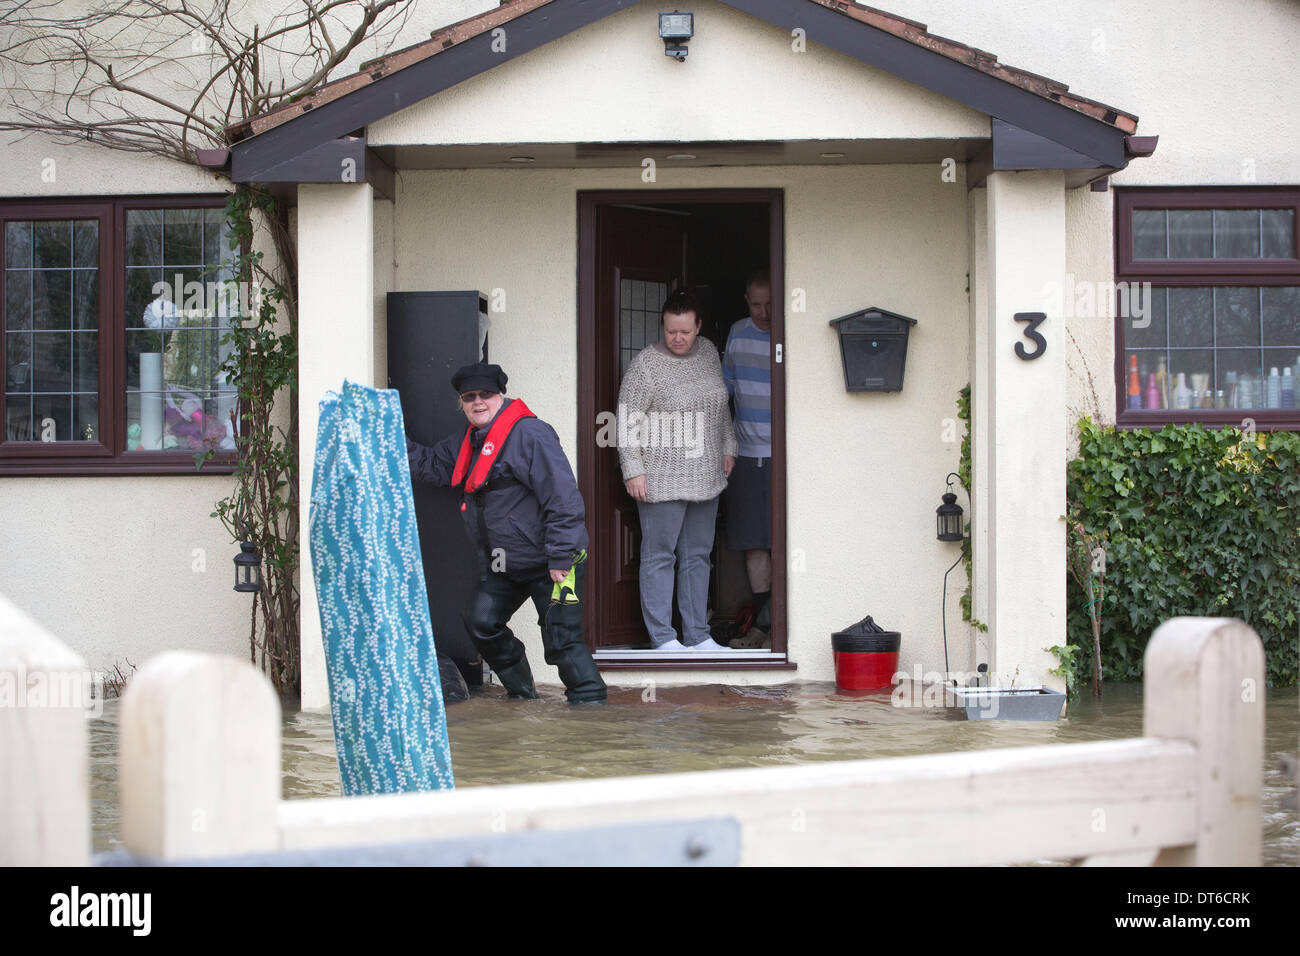 Shepperton, Greater London, UK. 9th Feb, 2014.  Jenny Beagle (walking in water) visits residents Penny and Christopher Holden, who live on the flooded streets in the town of Shepperton, located in the borough of Spelthorne, Greater London. Credit:  Jeff Gilbert/Alamy Live News Stock Photo